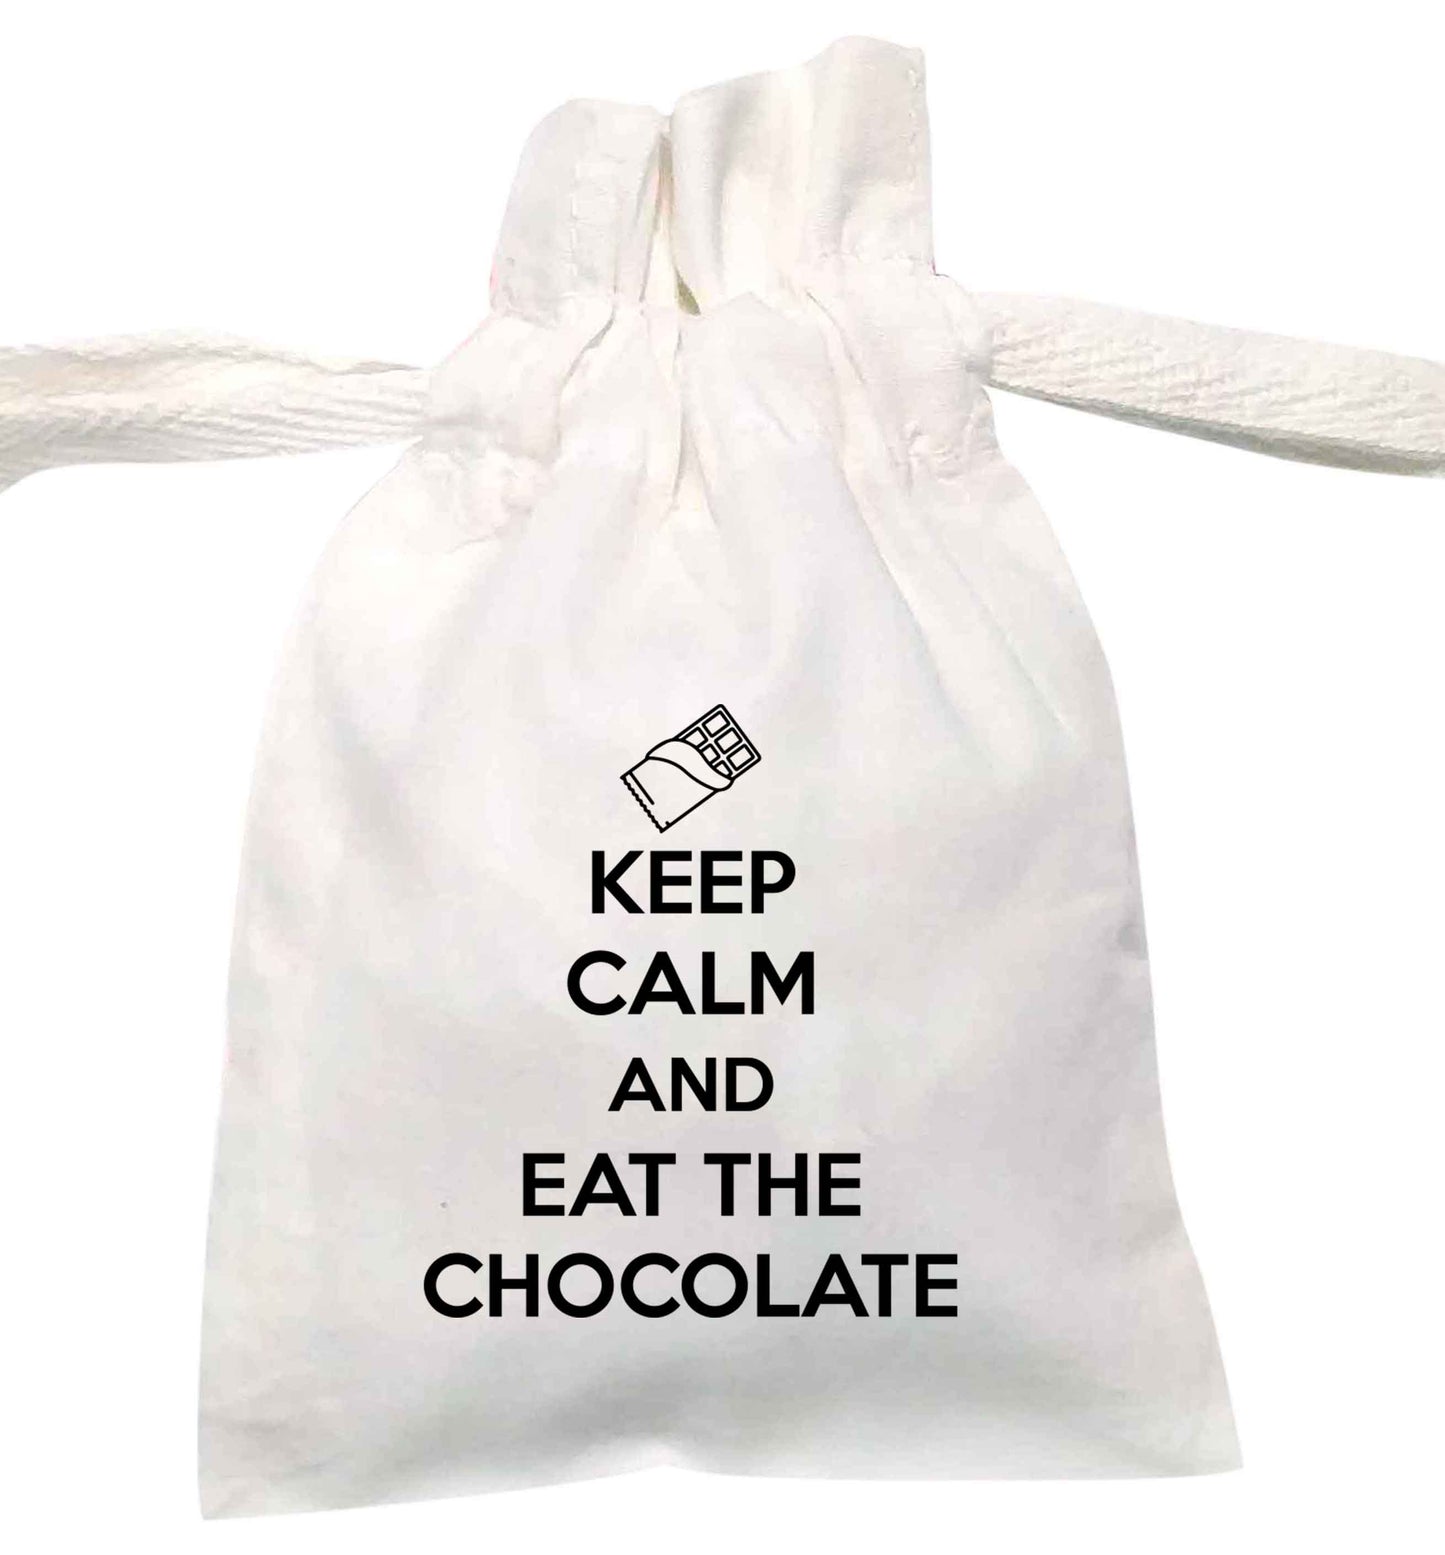 Keep calm and eat the chocolate | XS - L | Pouch / Drawstring bag / Sack | Organic Cotton | Bulk discounts available!